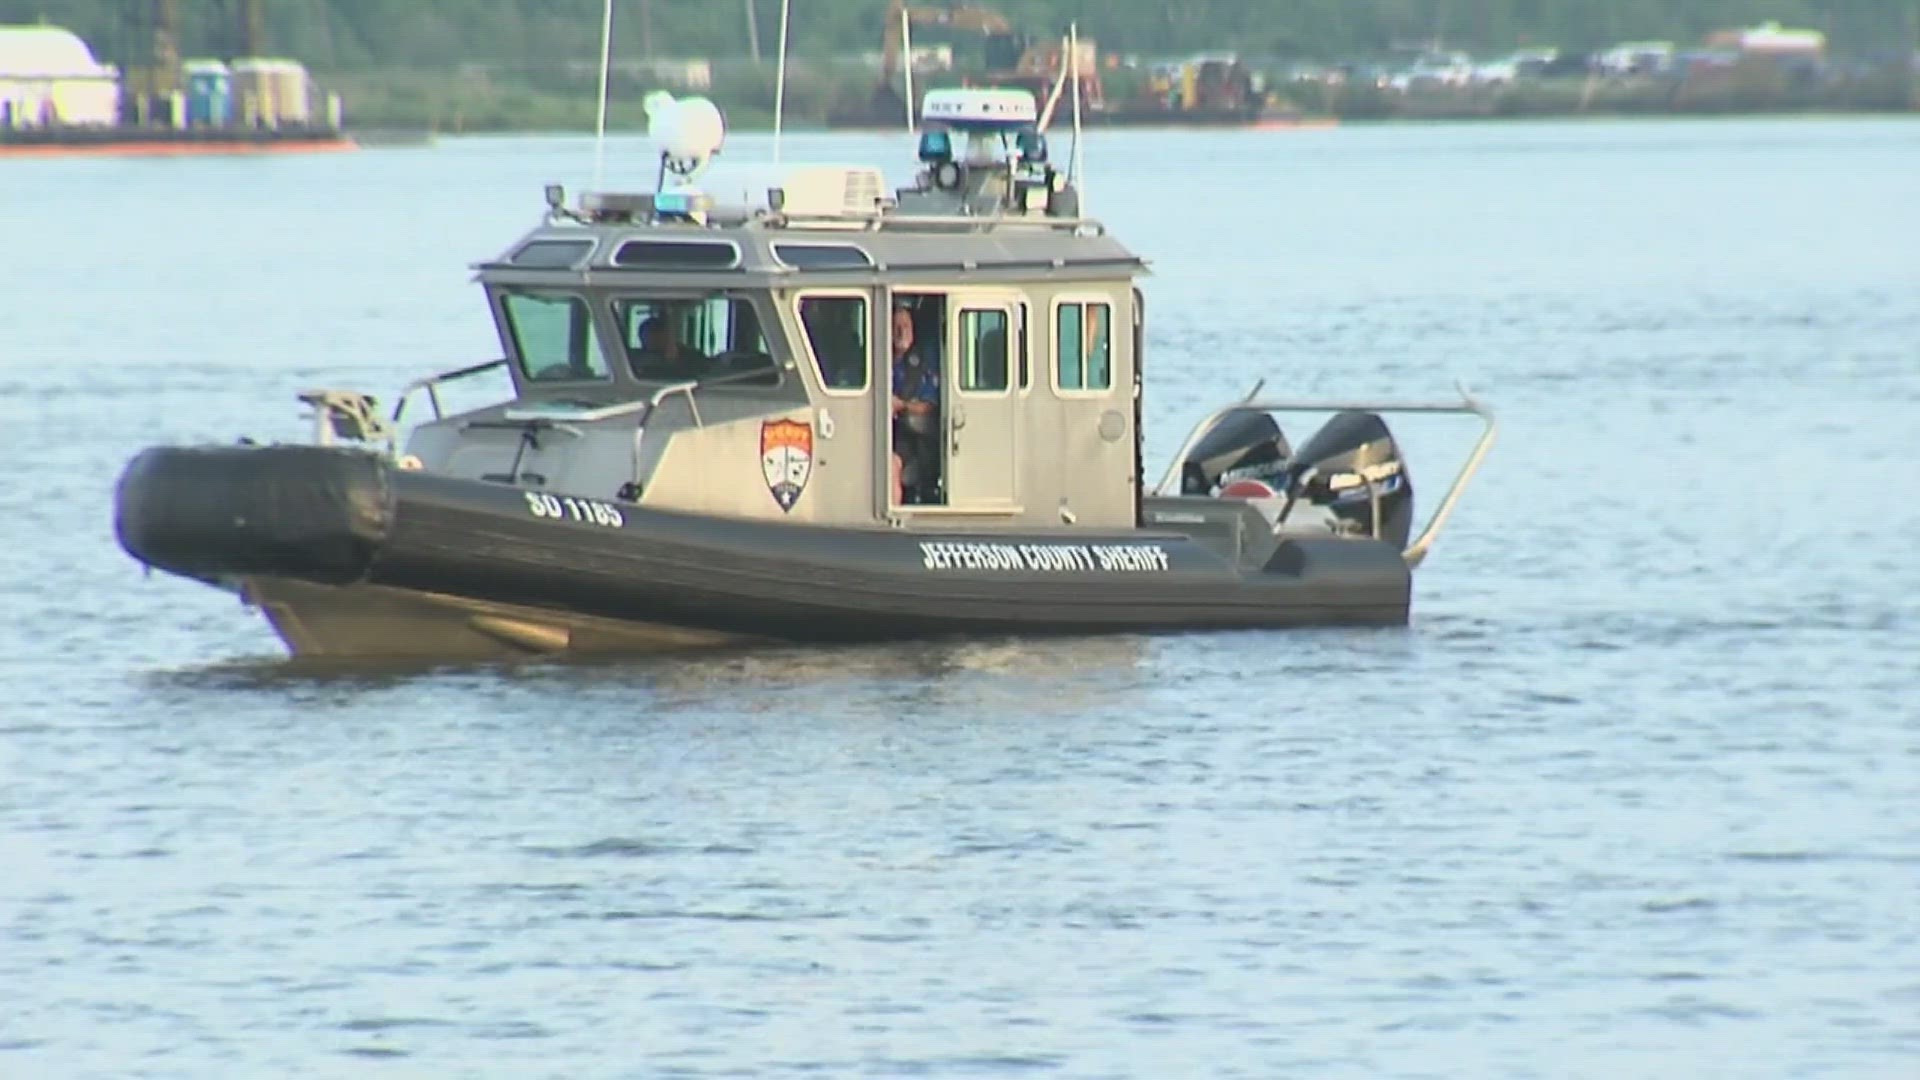 A 39-year-old South Texas man died Tuesday morning after his car went into the Intracoastal waterway along Pleasure Island.